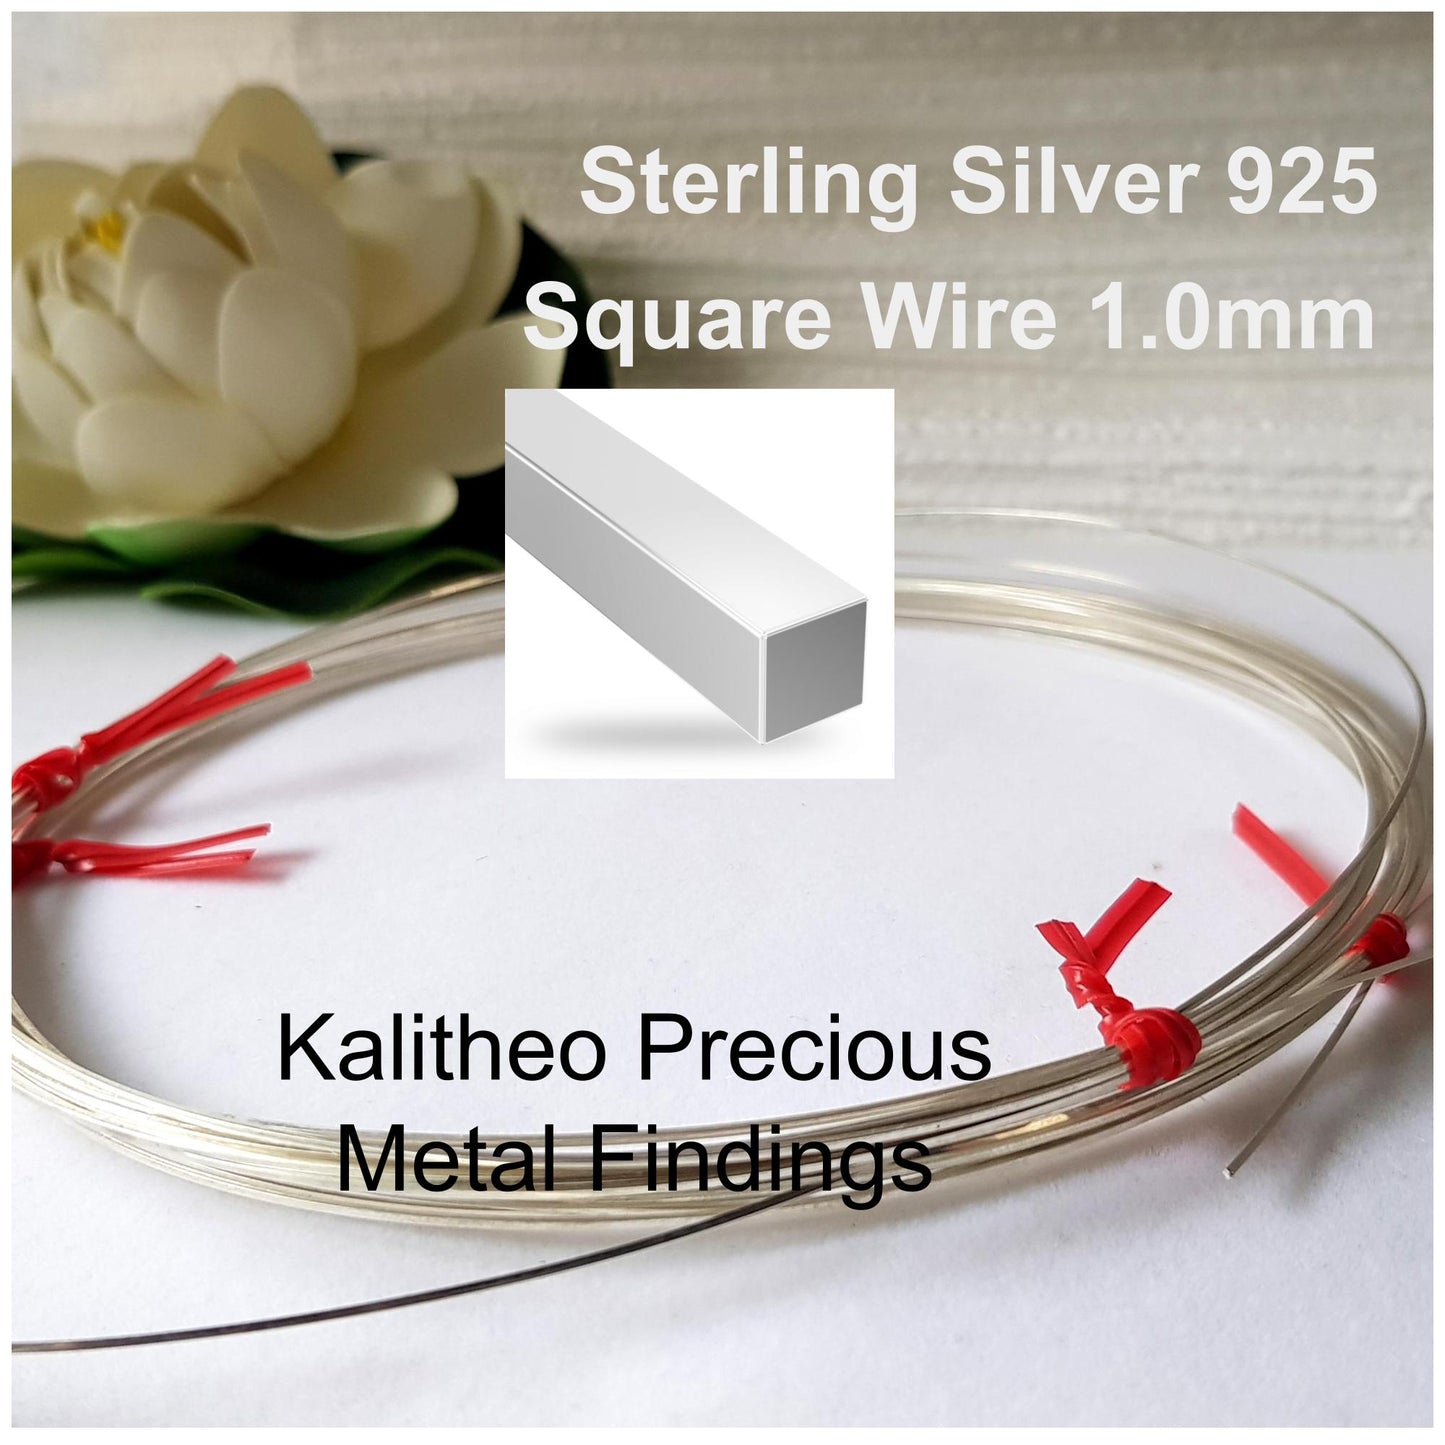 FAB Metals - 1.0mm - 18 gauge  [1mt] Square Medium Sterling Silver Wire | SS-MS1.0W | Jewellery Making Supply